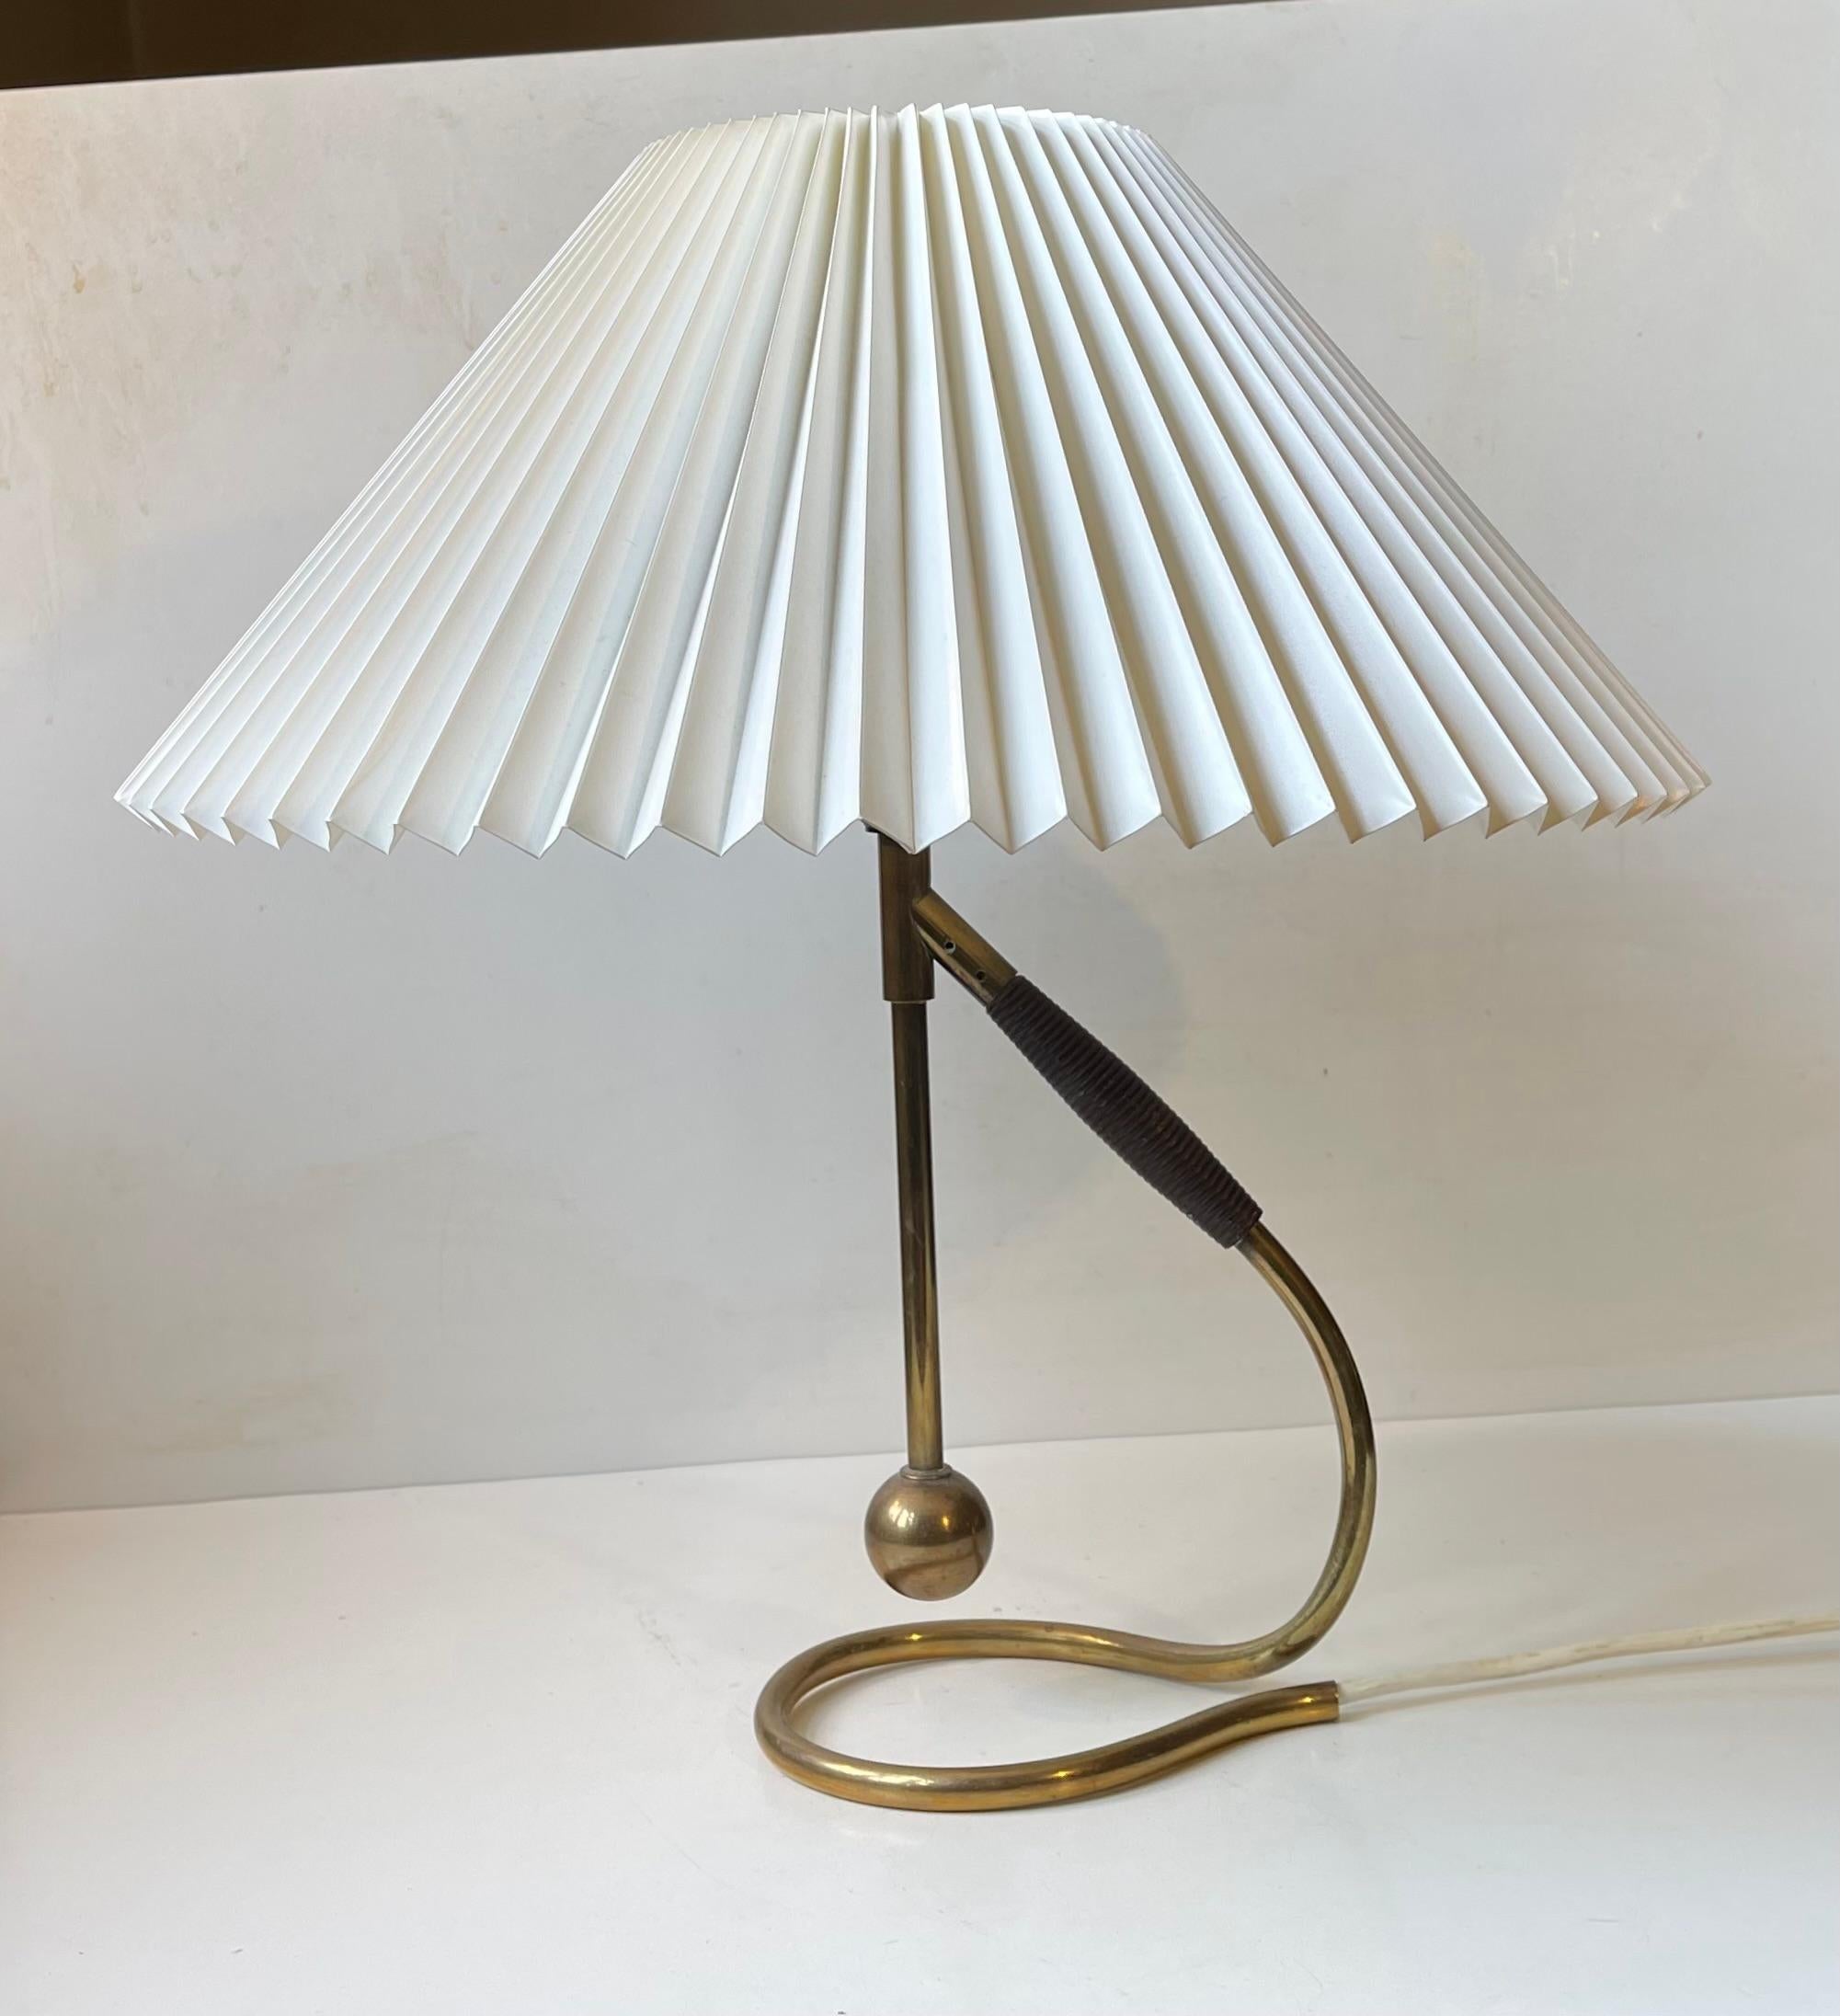 A very early model 306 hybrid wall or table lamp with base in solid tubular brass, bakelite socket and fluted Le Klint shade. Designed by architect and professor Kaare Klint in 1945. This example dates from the 1950s and has a model-correct more